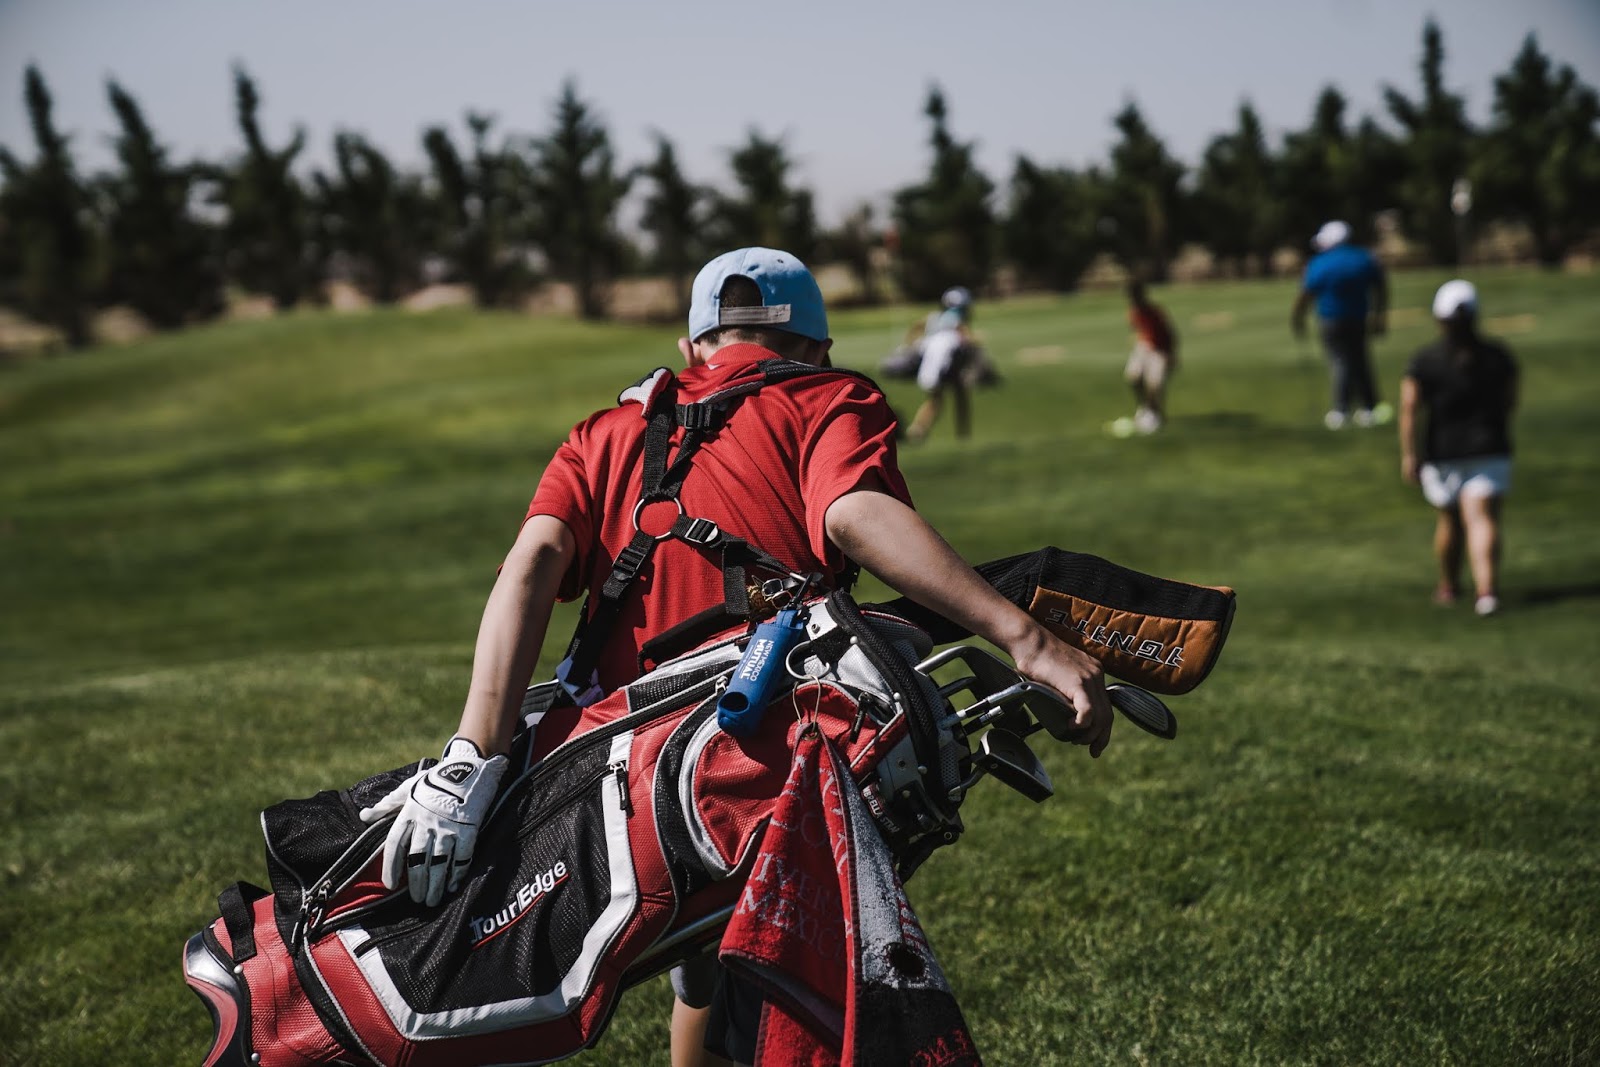 How To Organize Clubs In A 14 Golf Bag